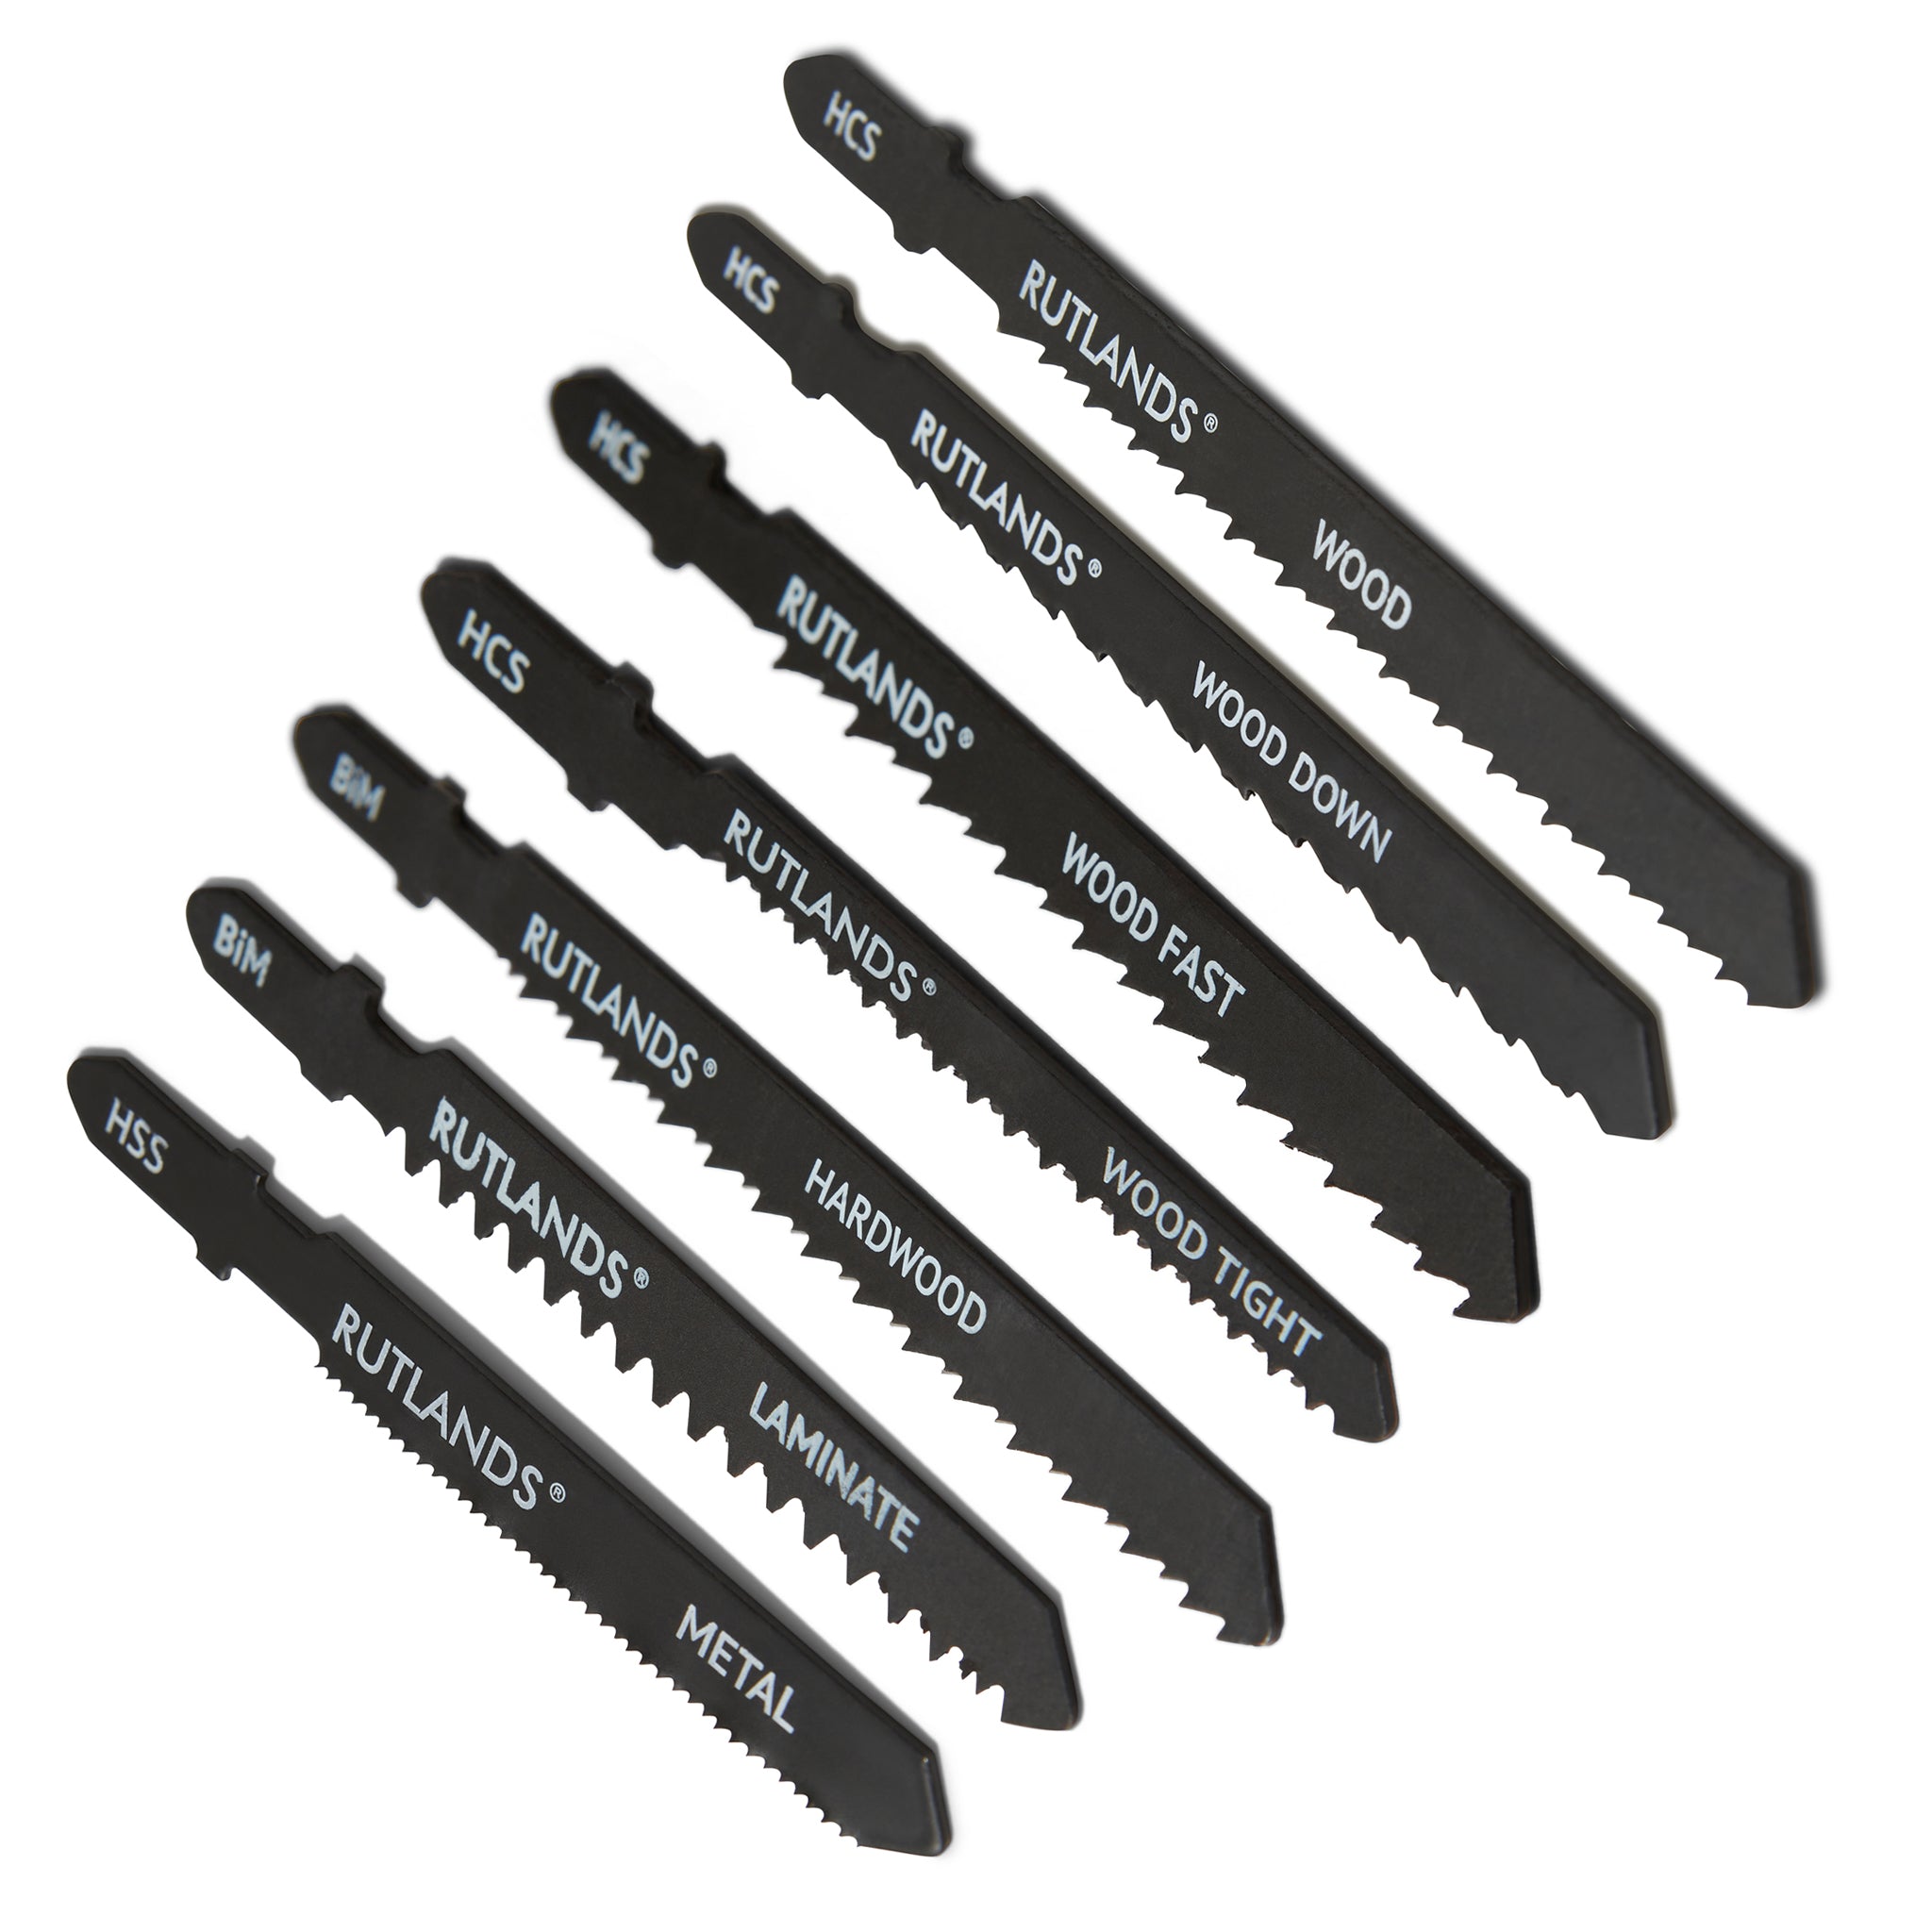 Jigsaw Blades - Mixed Pack of 35